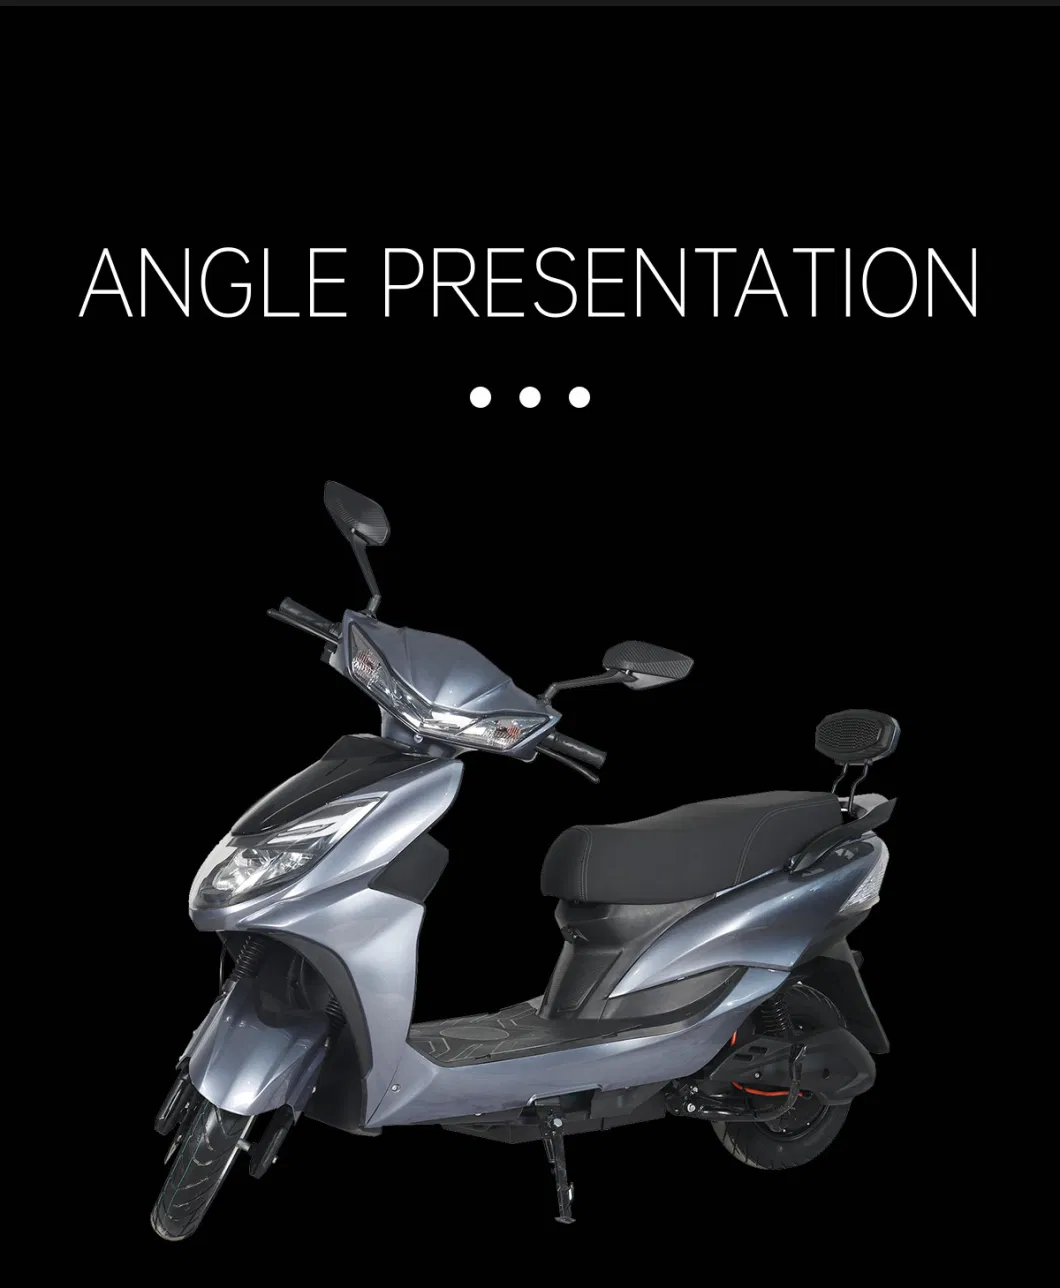 Cheap Price Electric Motorbike Motorcycle Scooter Electrical Cycle Good Design Best OEM Branding CKD/SKD Adult Electric Motorcycle